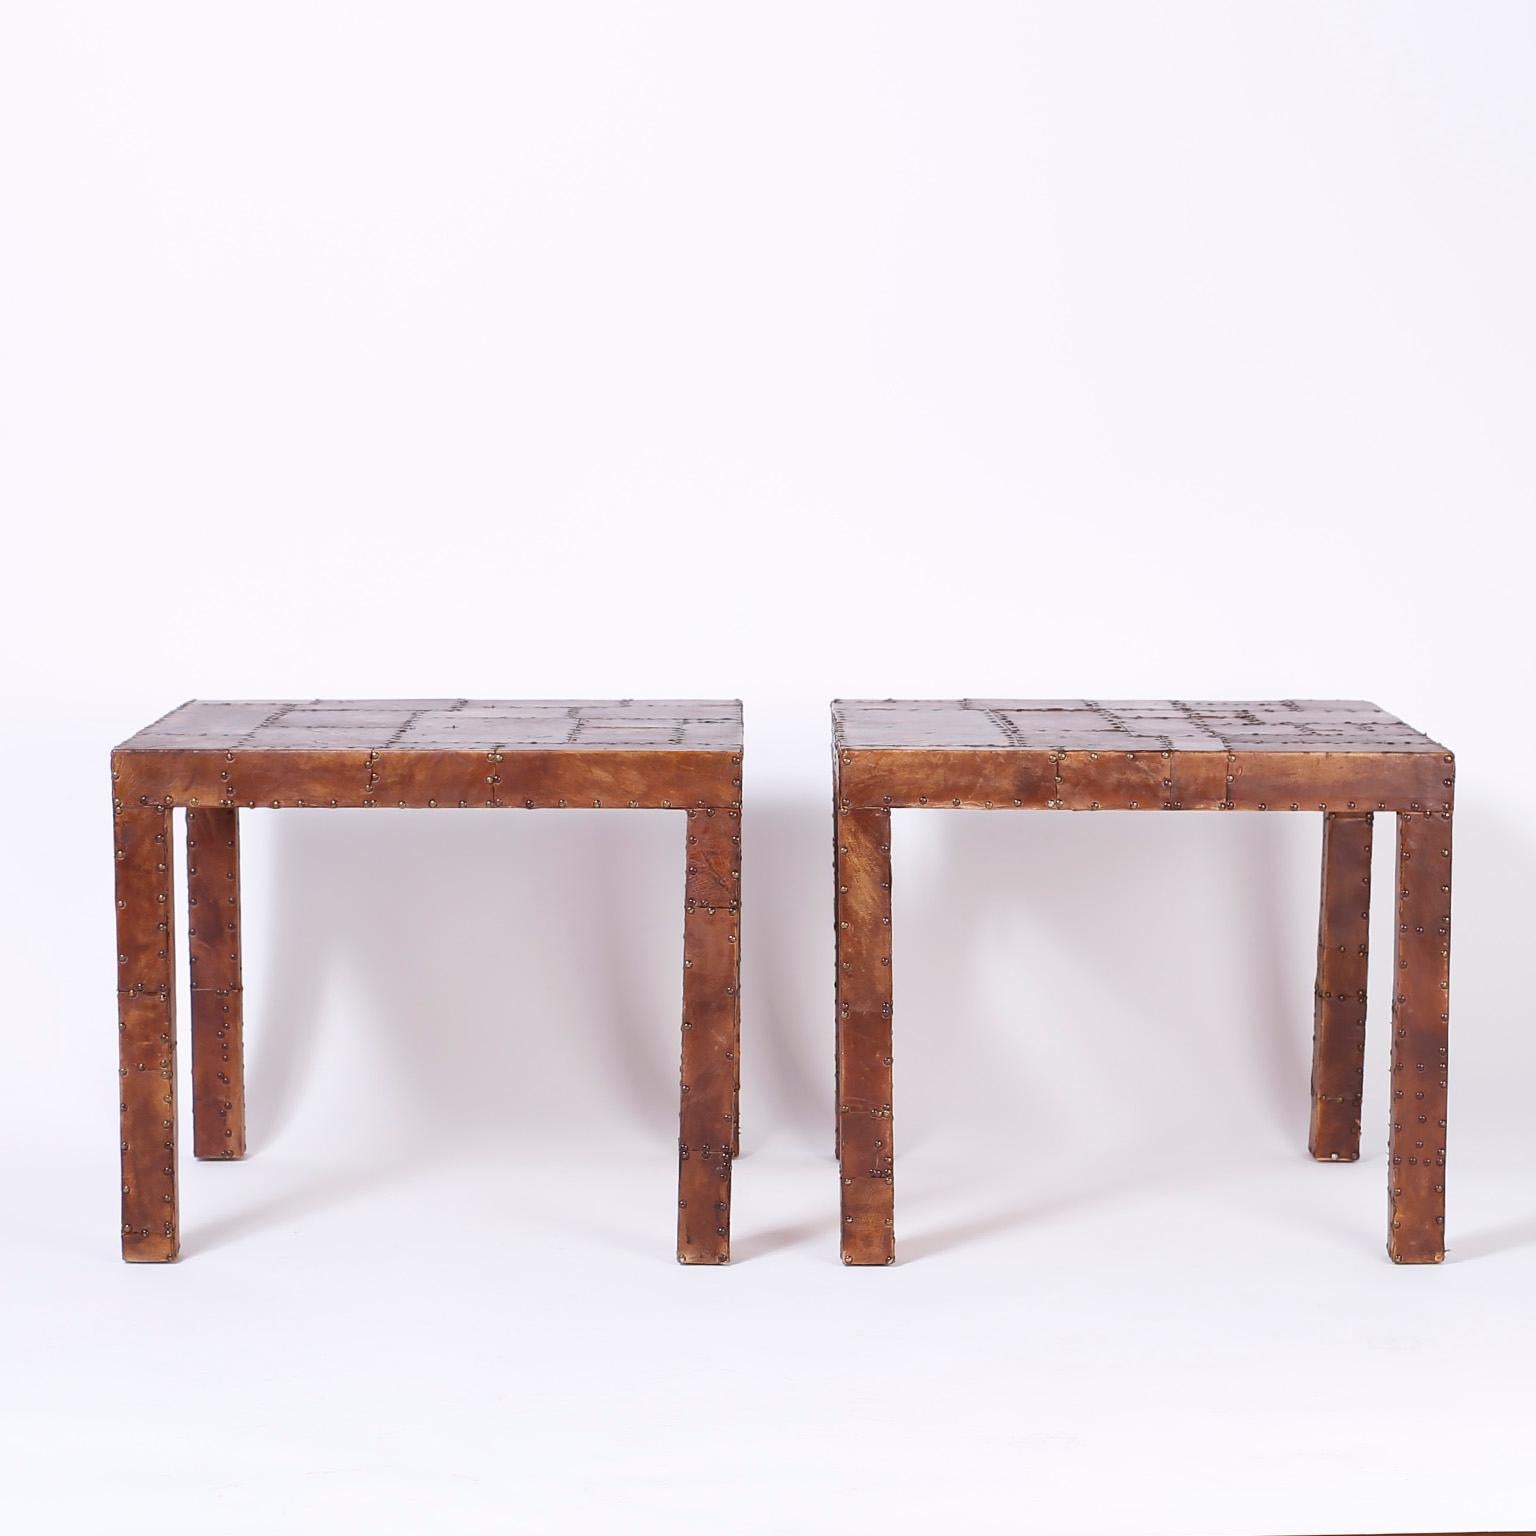 Swank pair of midcentury end tables with a Classic Parson's form entirely clad in patches of brown leather with brass tacks giving these tables an unusual warm industrial ambiance.